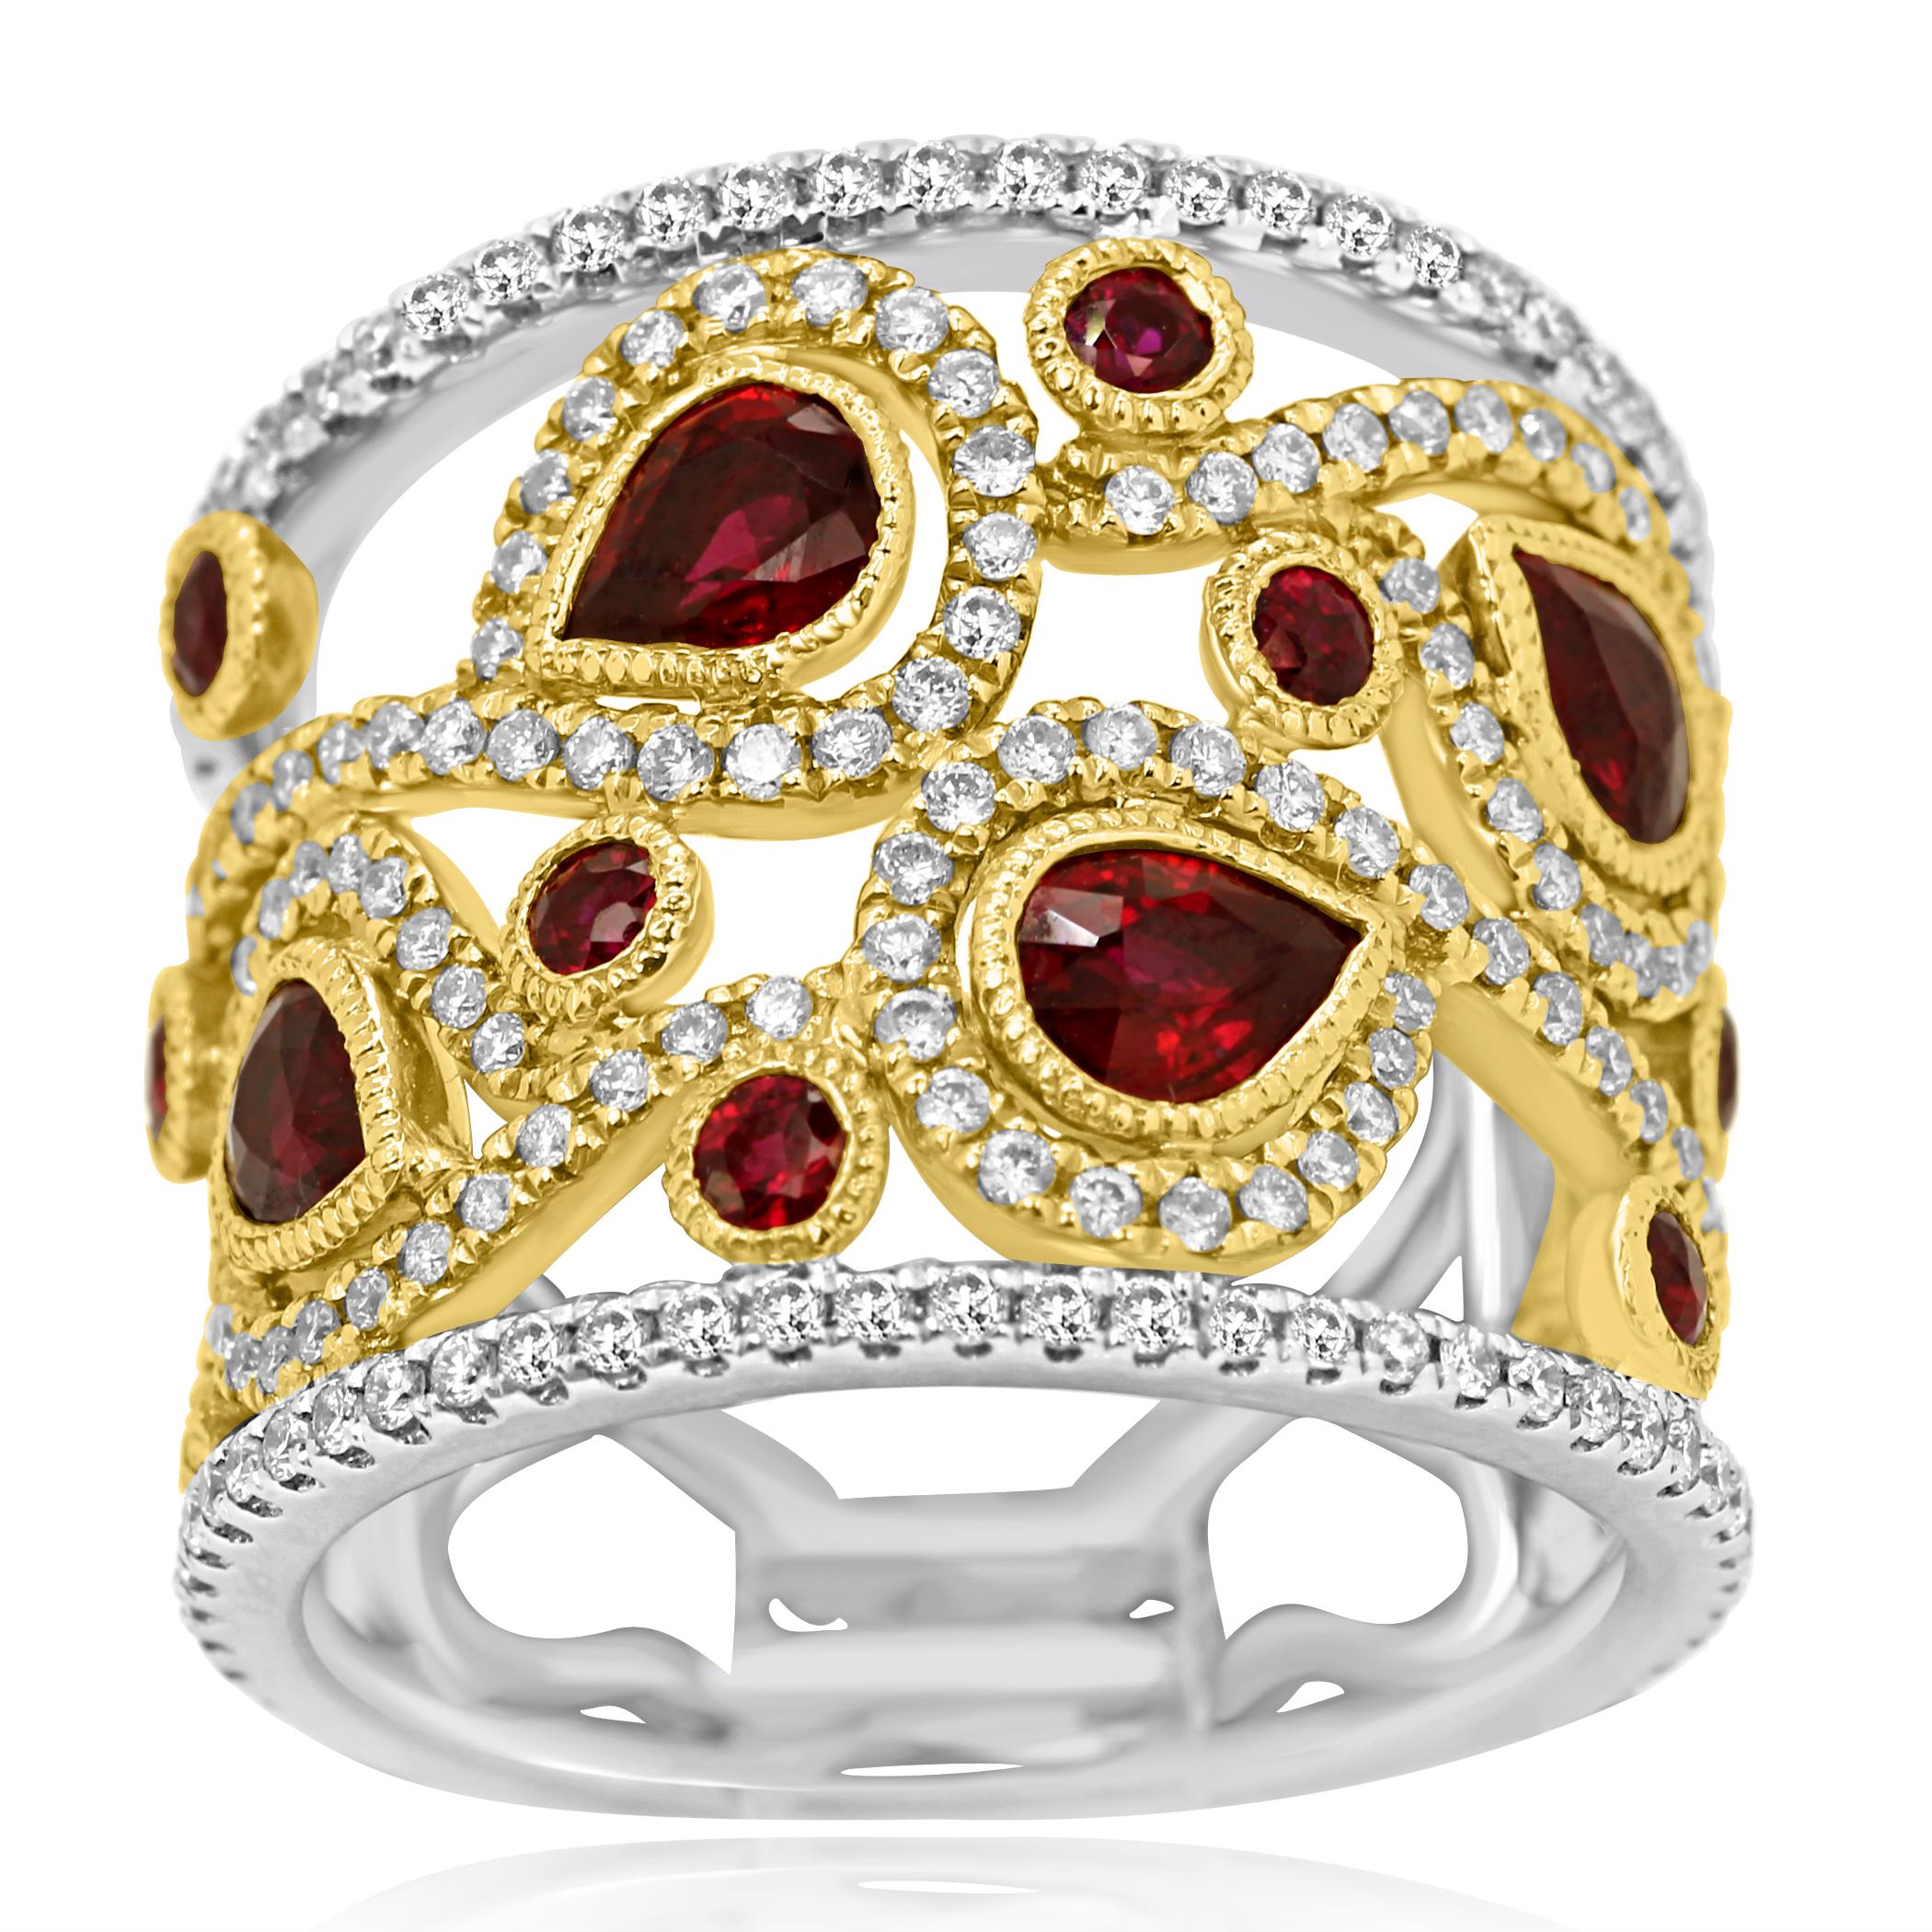 4 Ruby Pear Shape 1.43 Carat 10 Ruby Round 0.63 Carat set along side Colorless Round Brilliant VS-SI Clarity Diamonds 1.03 Carat in 14K White and Yellow Gold in Stunning Fashion Cocktail Band Ring.

Total Ruby Weight 2.06 Carat
Total Diamond Weight